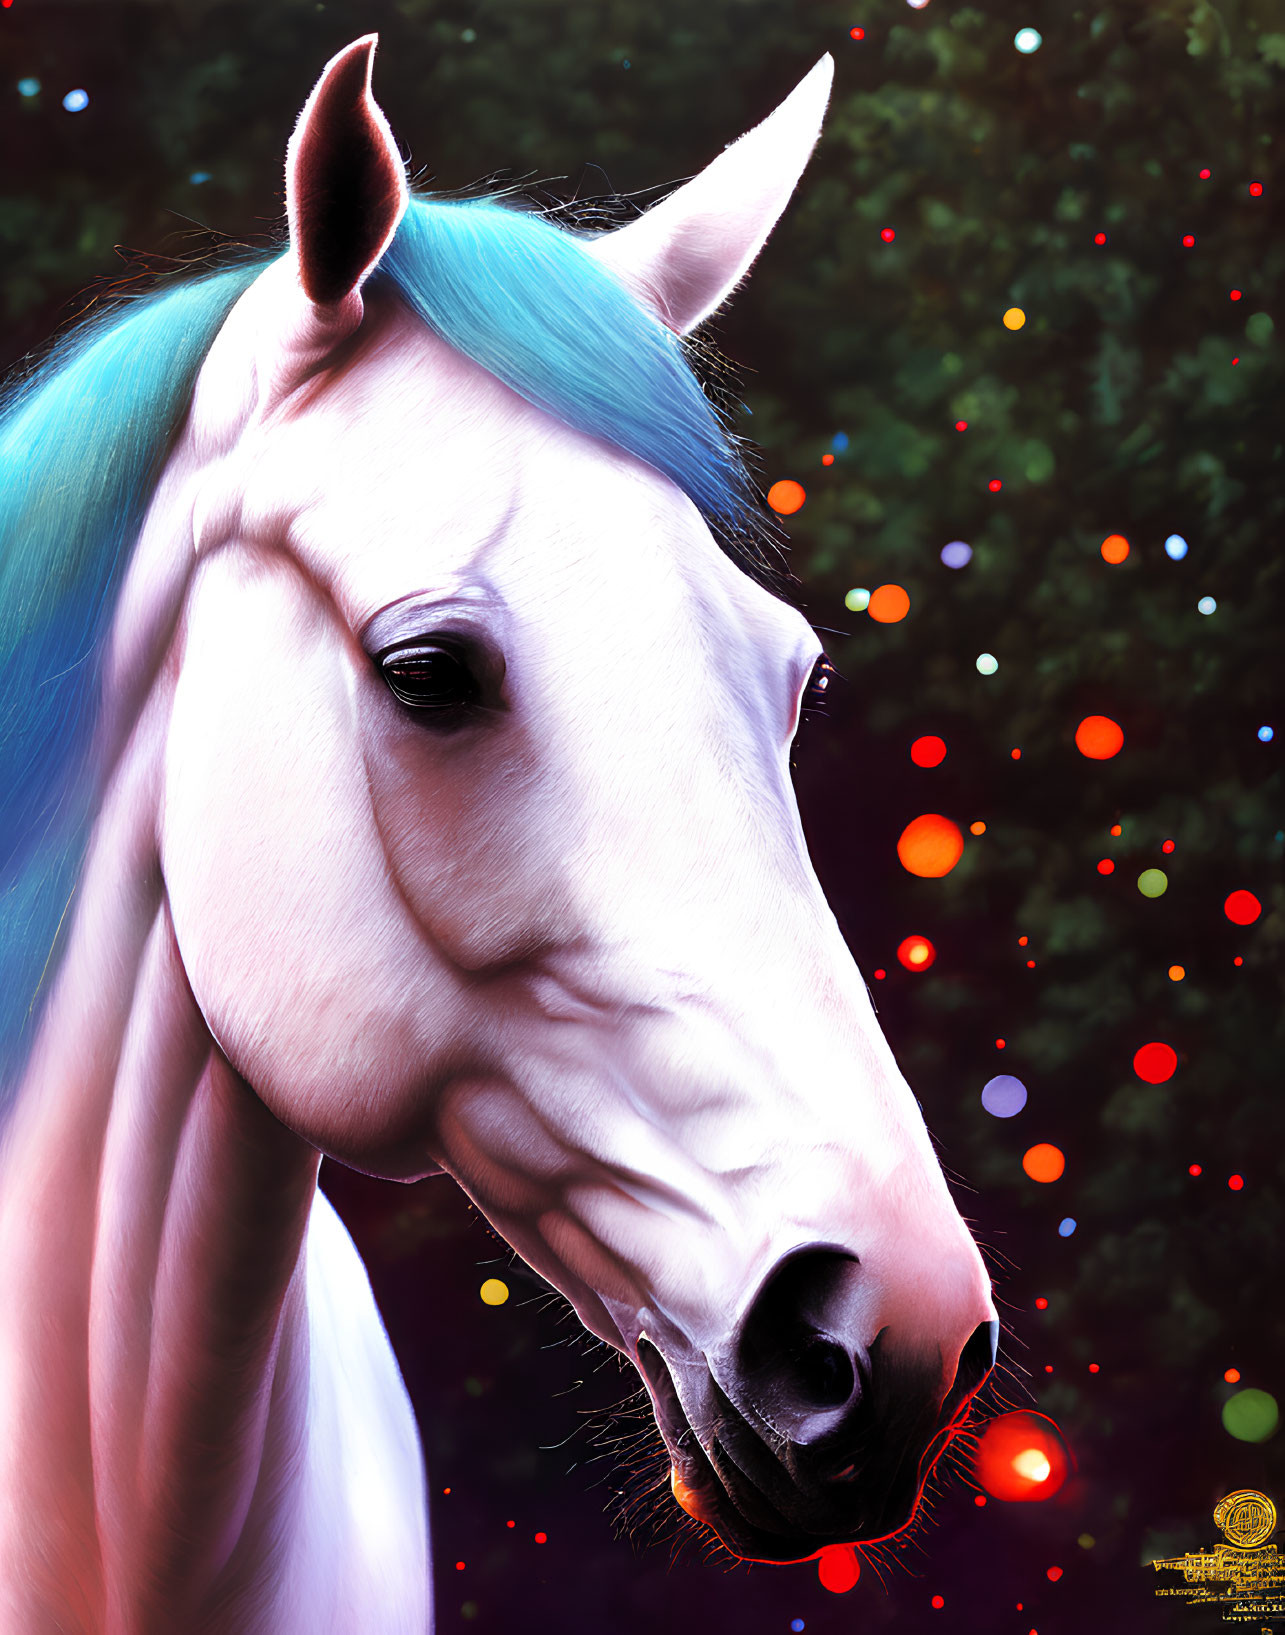 White Horse with Blue Mane in Dark Background with Colorful Bokeh Lights